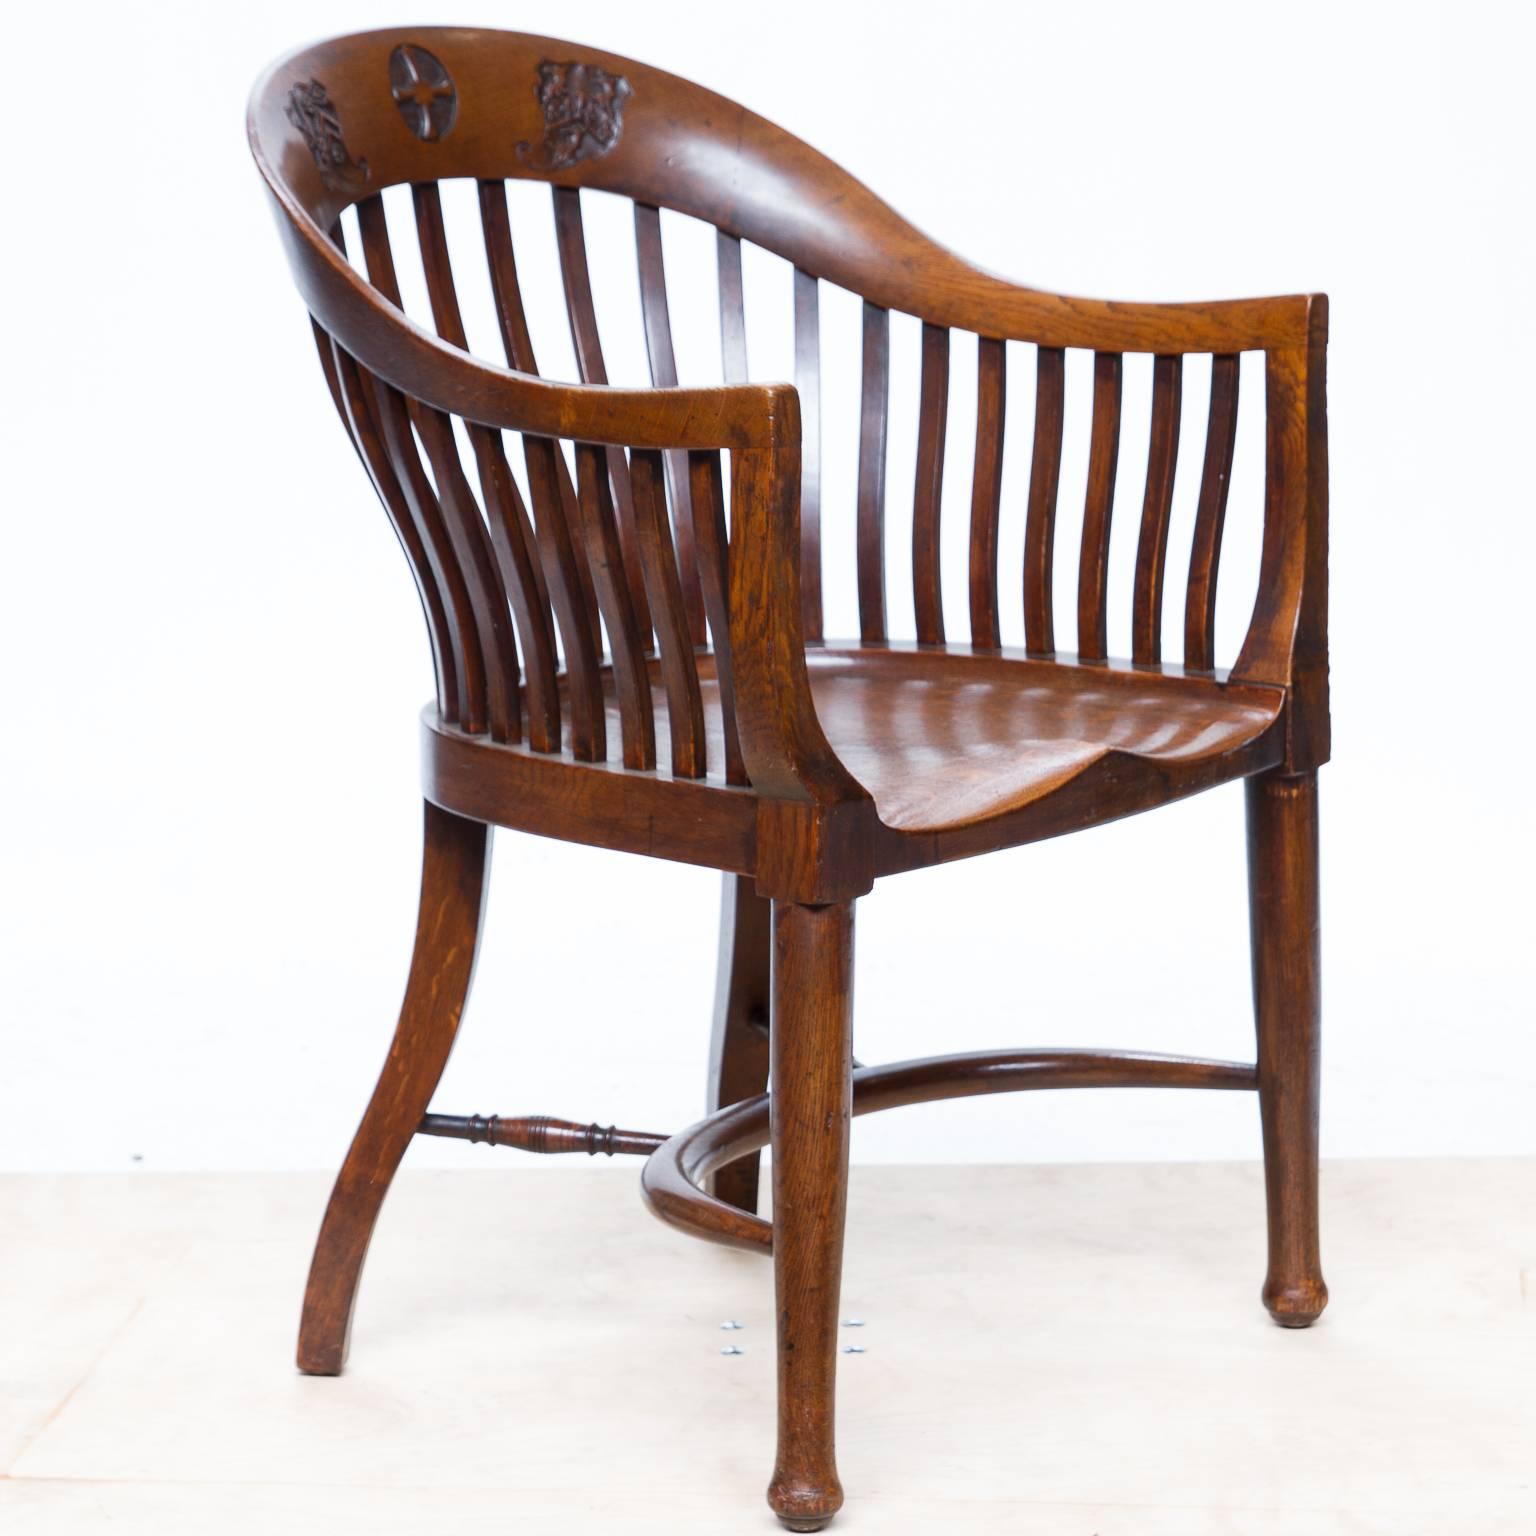 Vintage English barrel back Headmaster's chair. Made from English oak. Very unusual shaped back with individual bent slats. Chiseled shaped seat and a bow shaped stretcher connecting the four legs and for support. The top rail of the back is